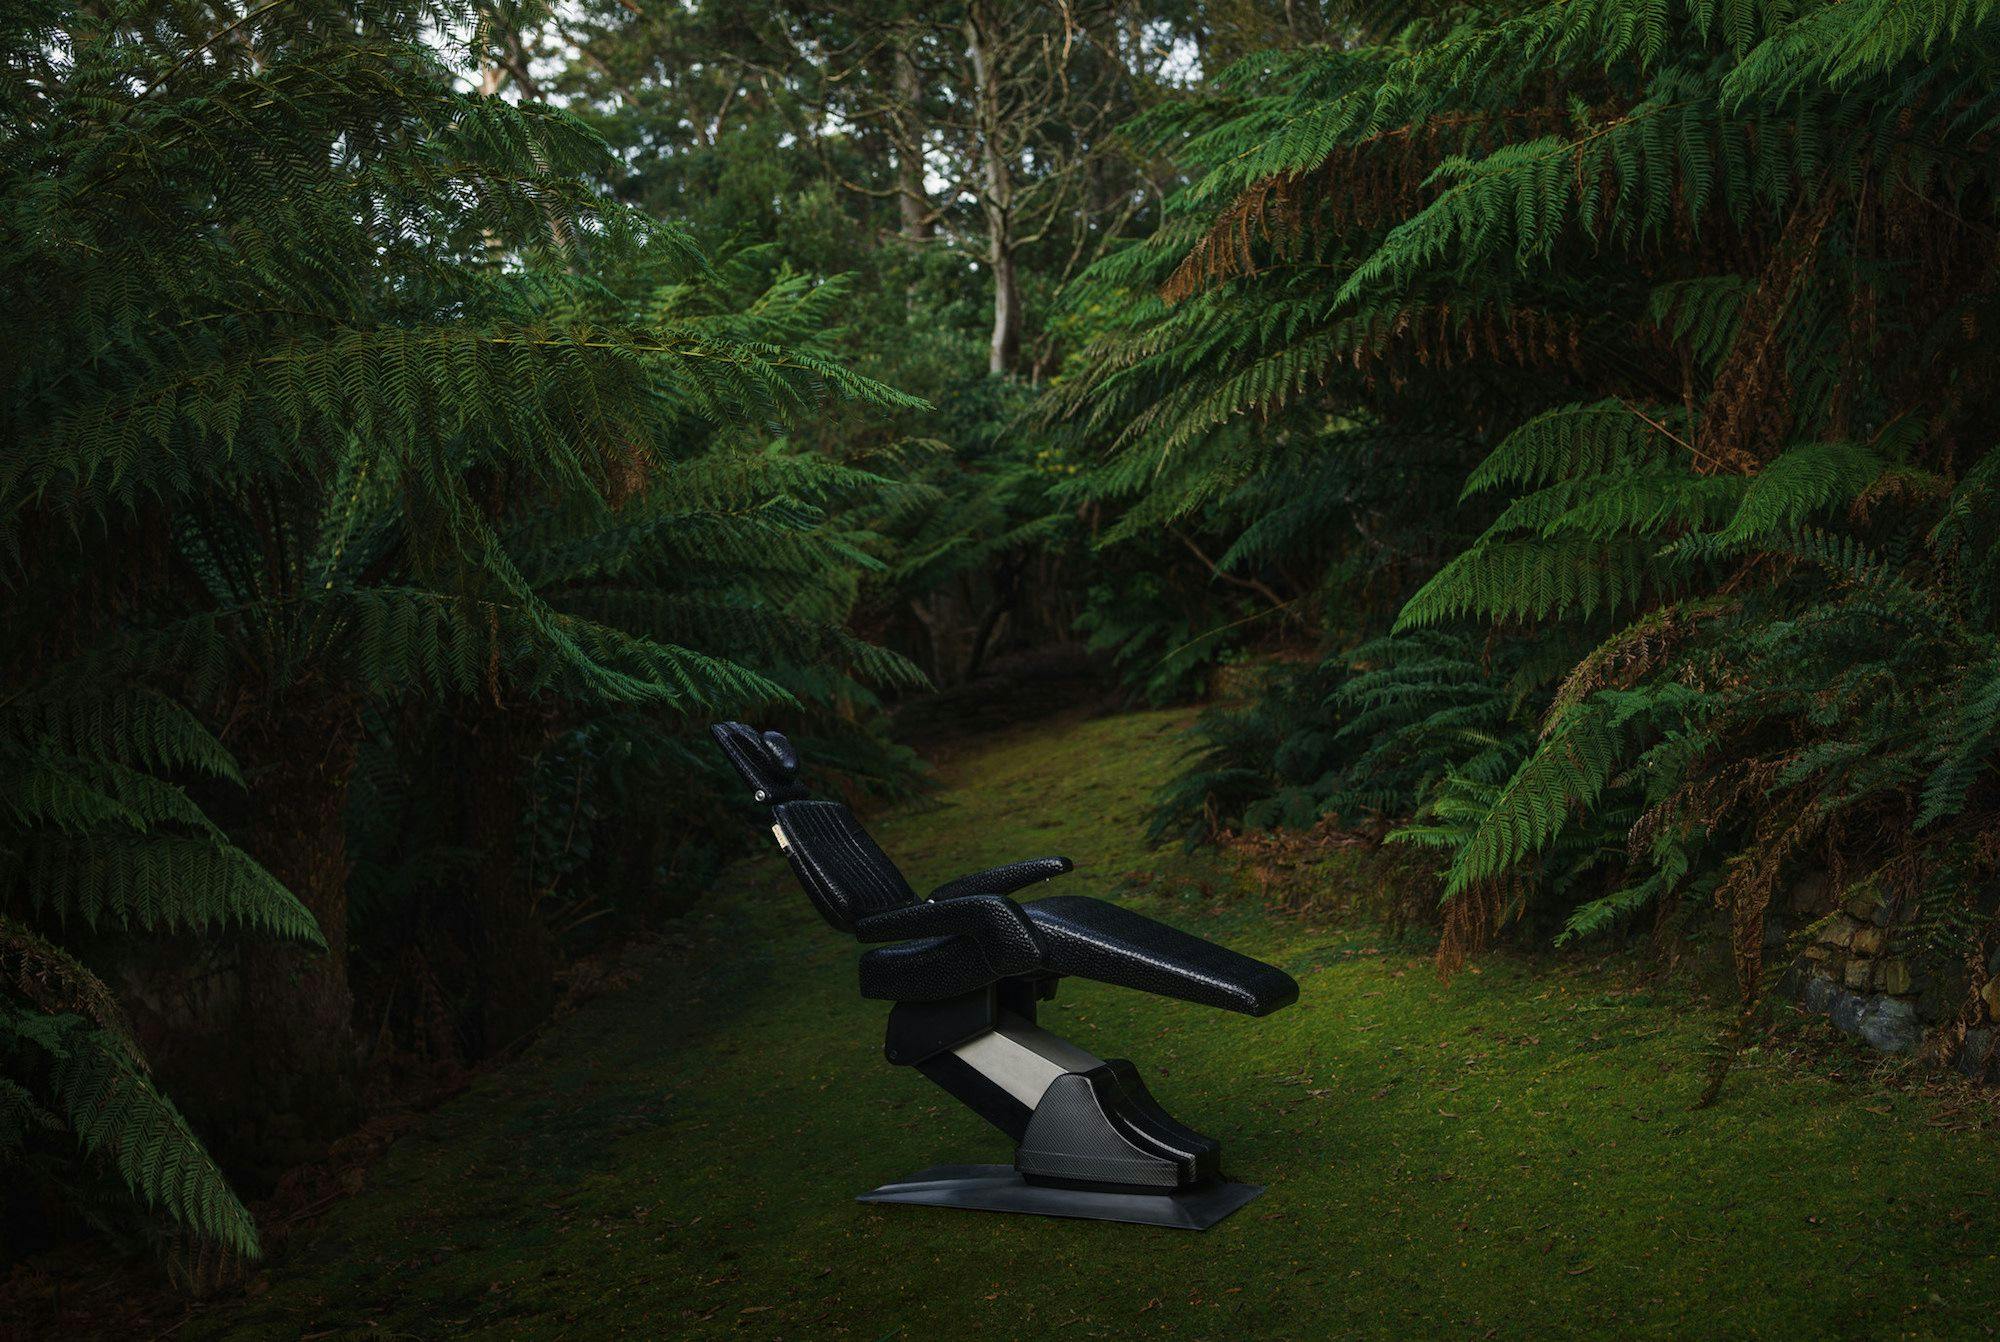 Medical chair on moss in a fern filled forest scene